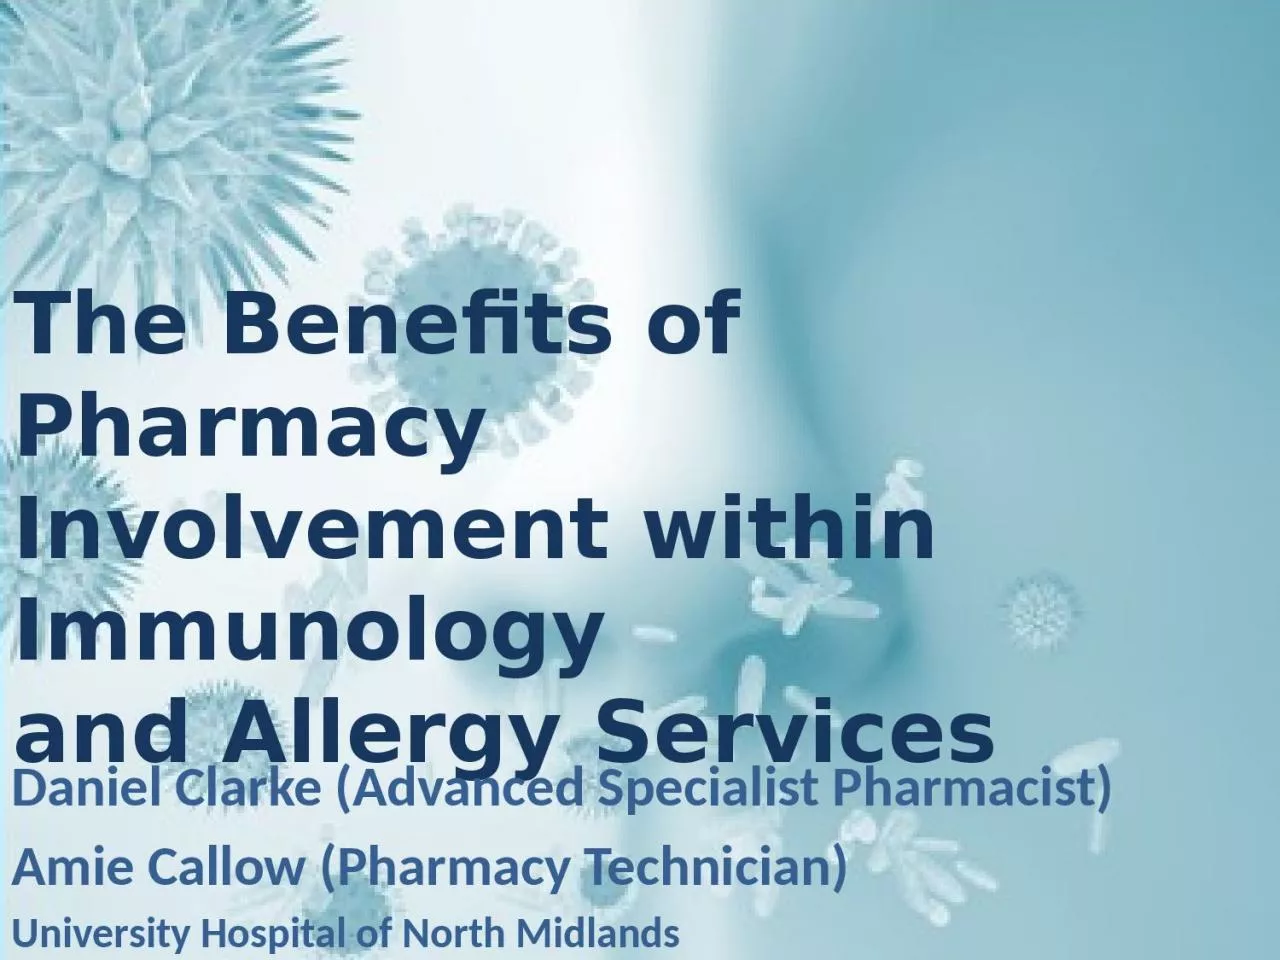 The Benefits of Pharmacy Involvement within Immunology